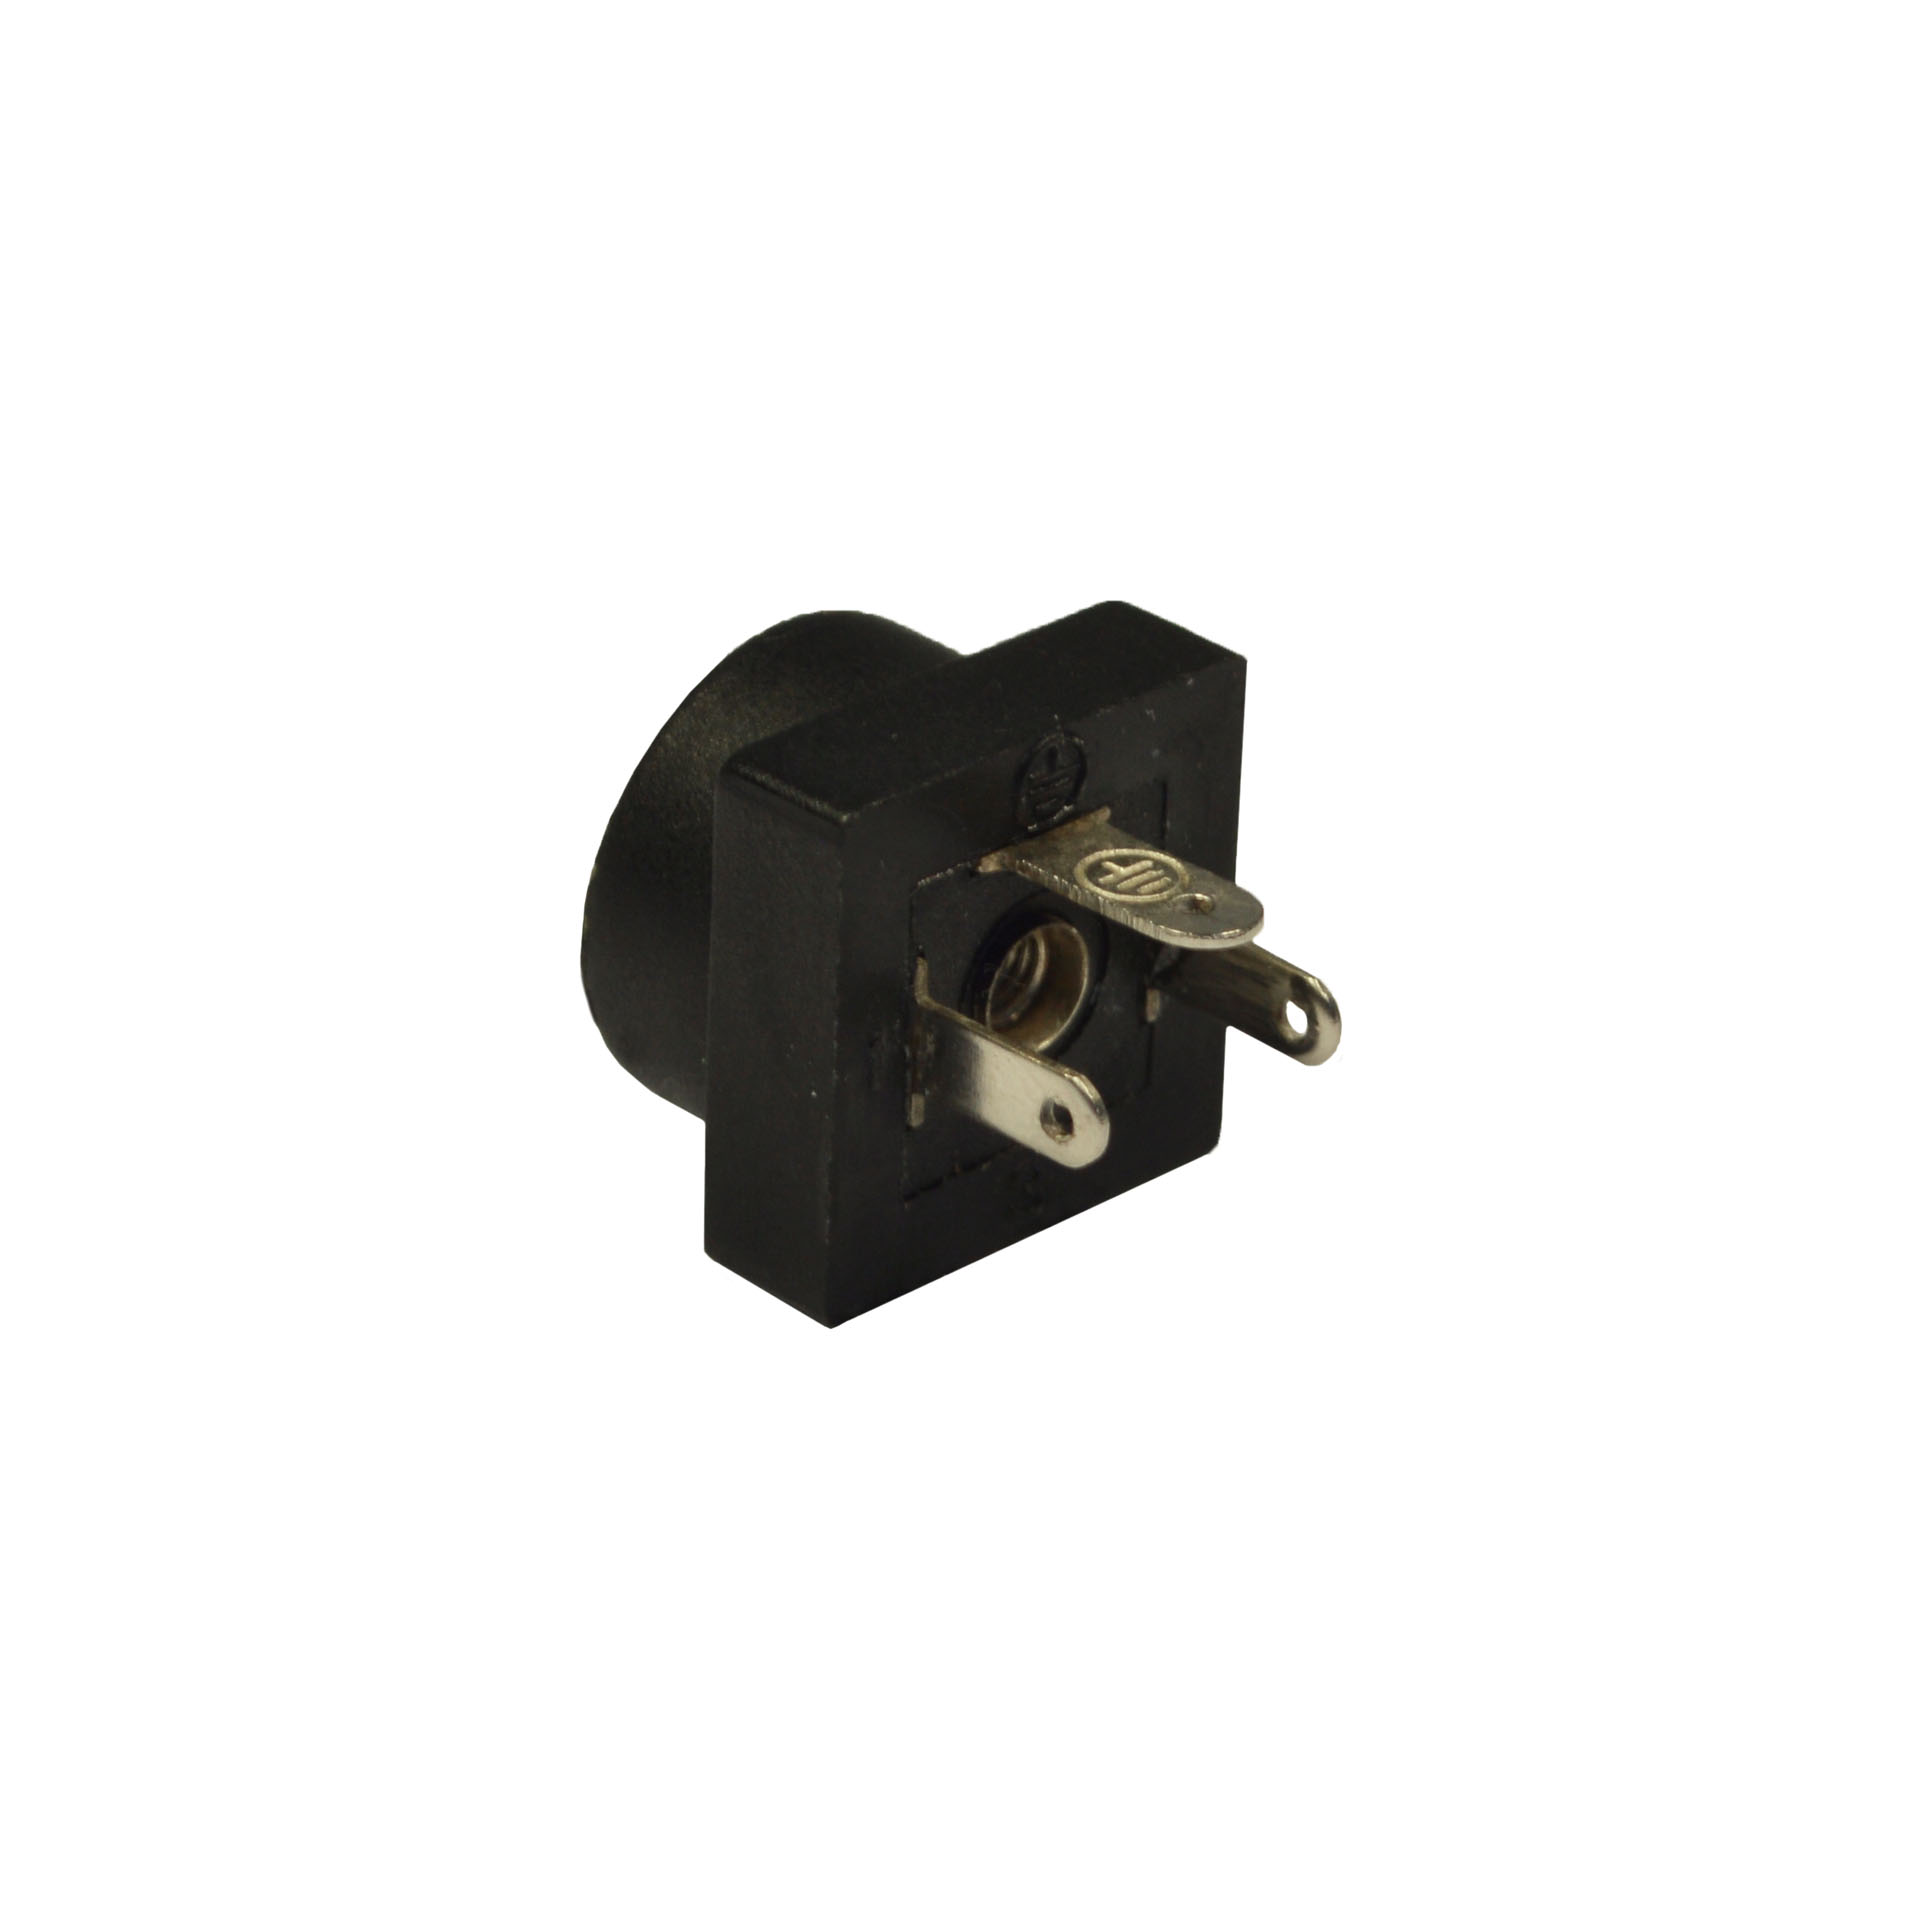 Base for fitting on surface holes Ø 15 DIN 43650/C, 15,5x15,5 - 2p + E - spacing 9,4mm,black